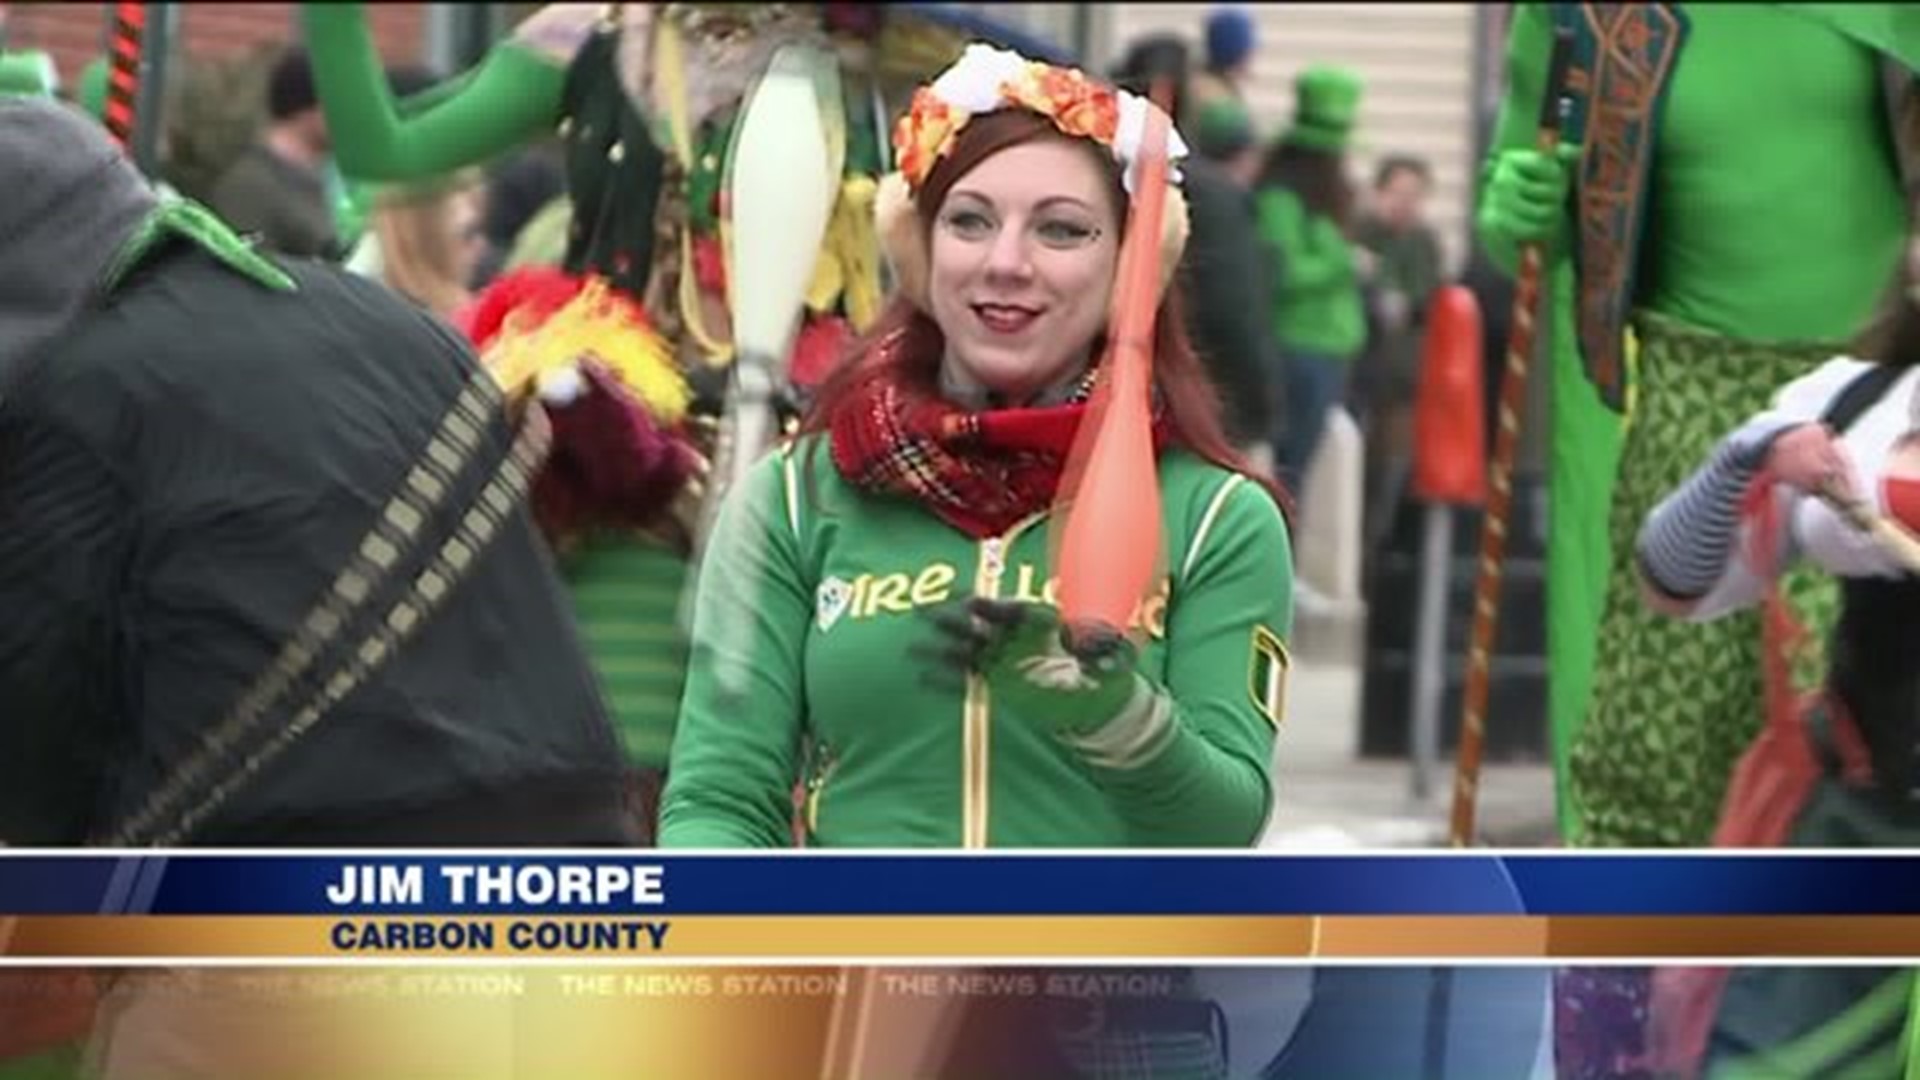 Parade Goers Brave the Cold in Carbon County